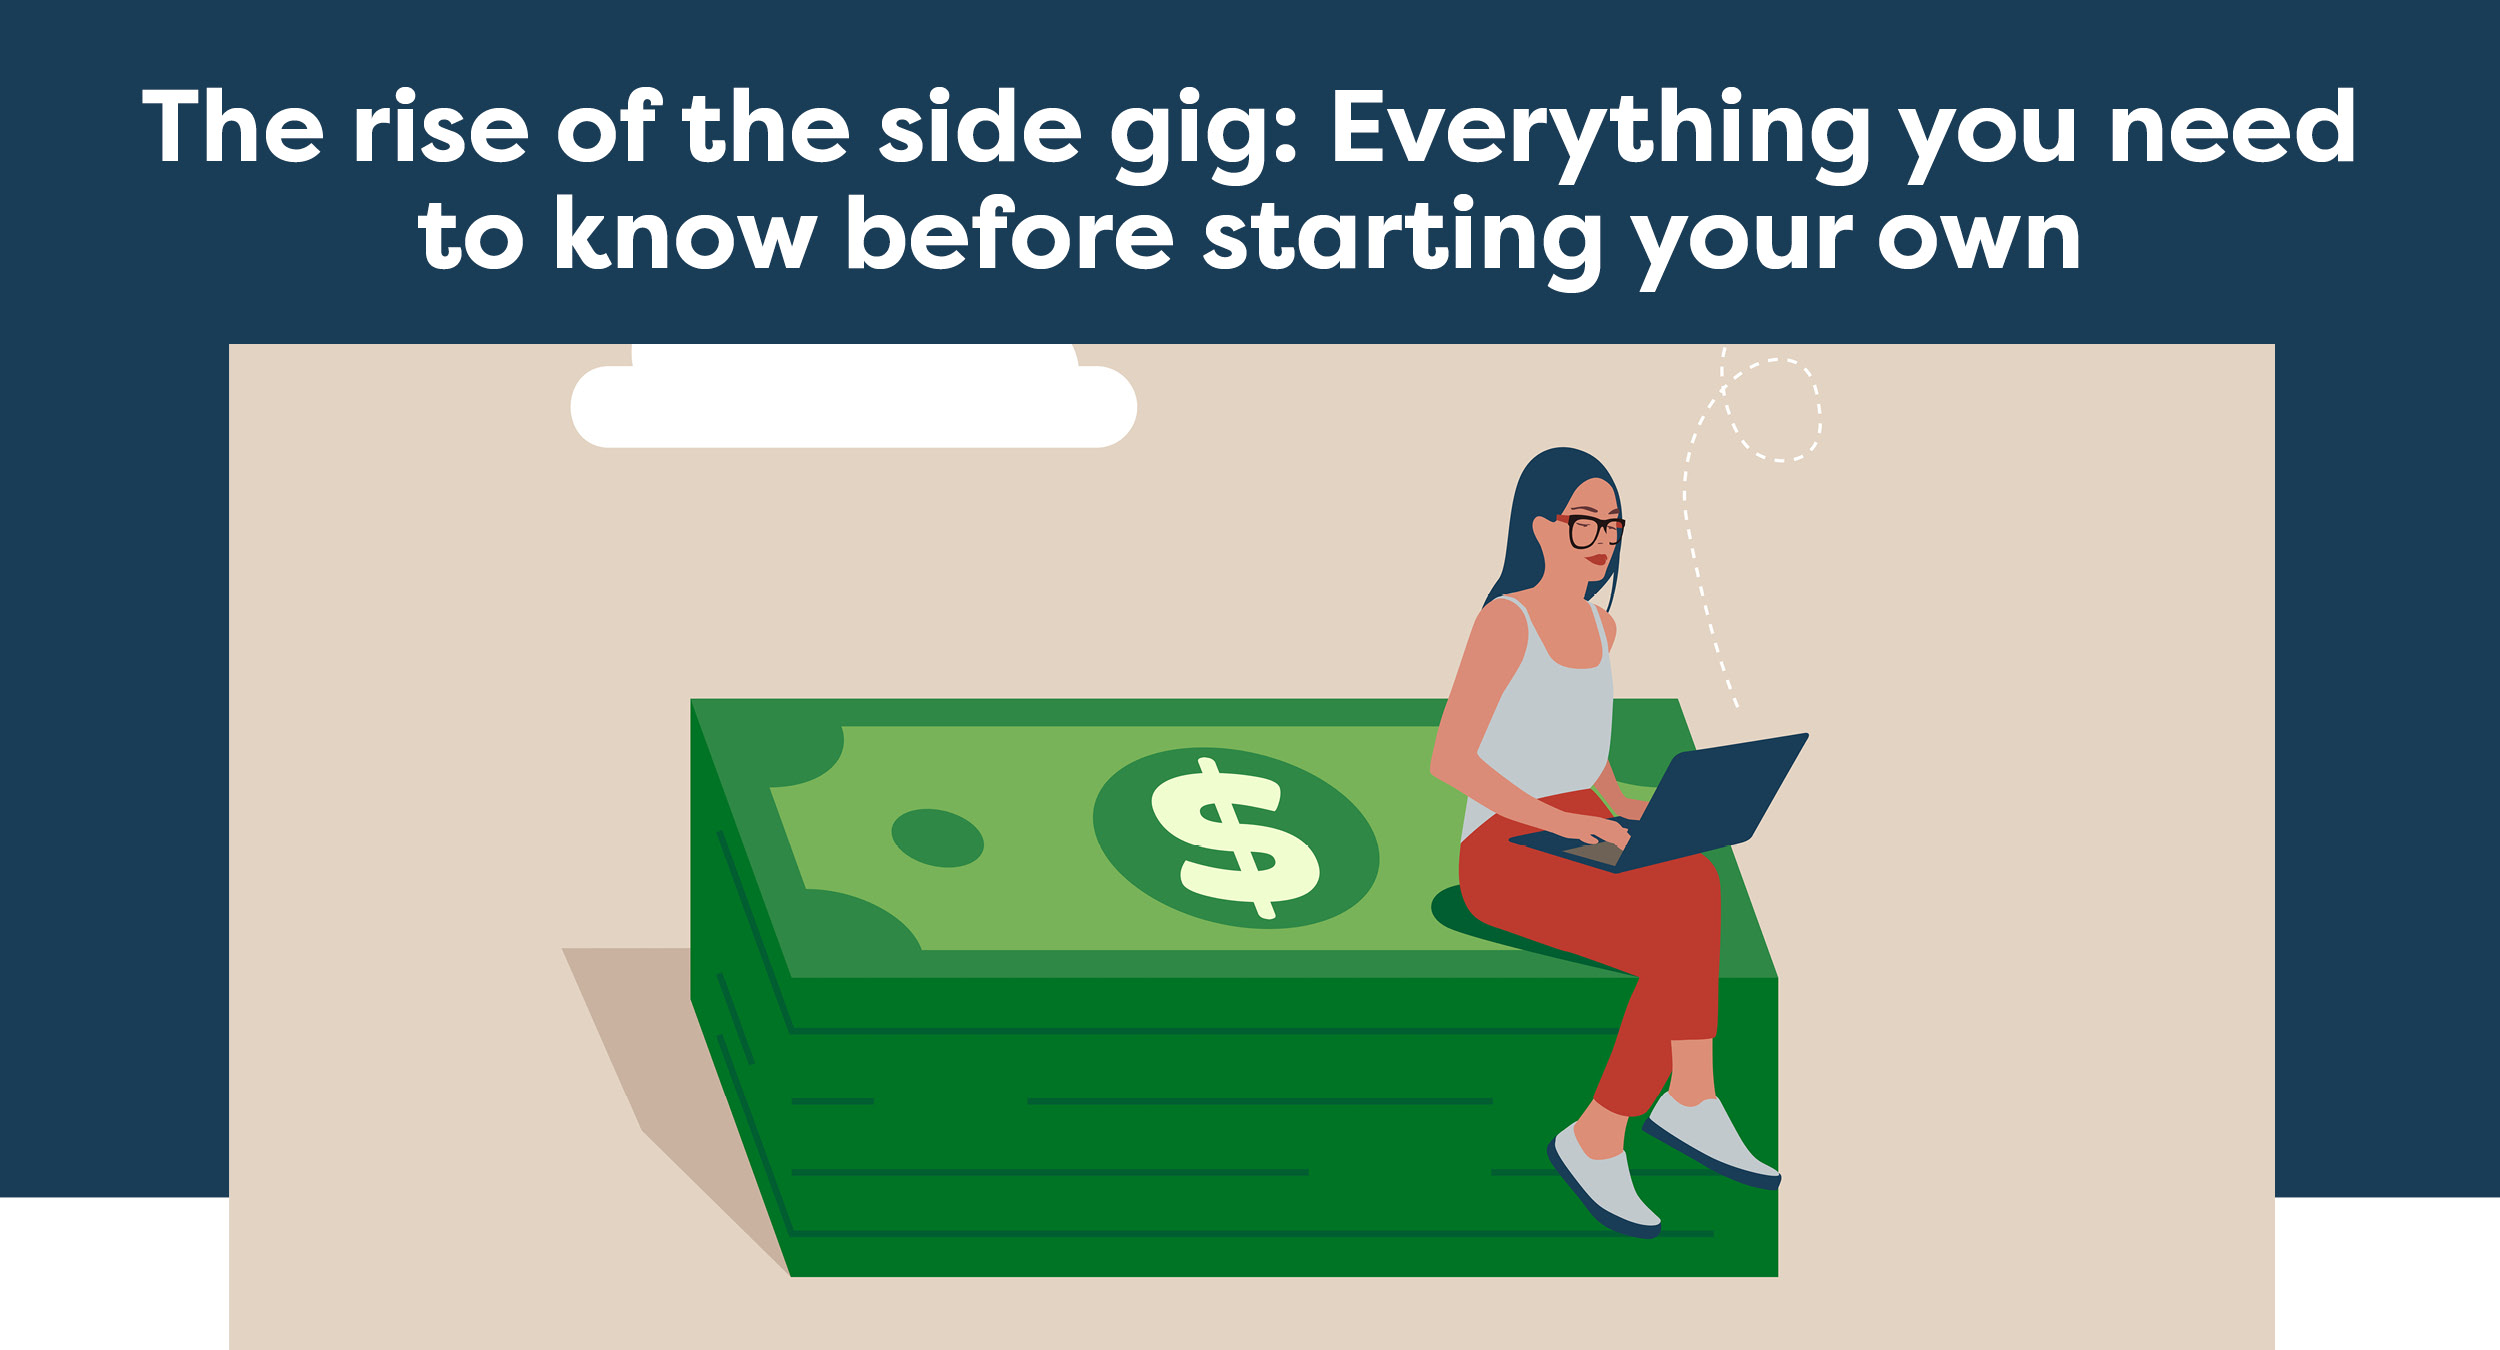 The rise of the side gig: Everything you need to know before starting your own